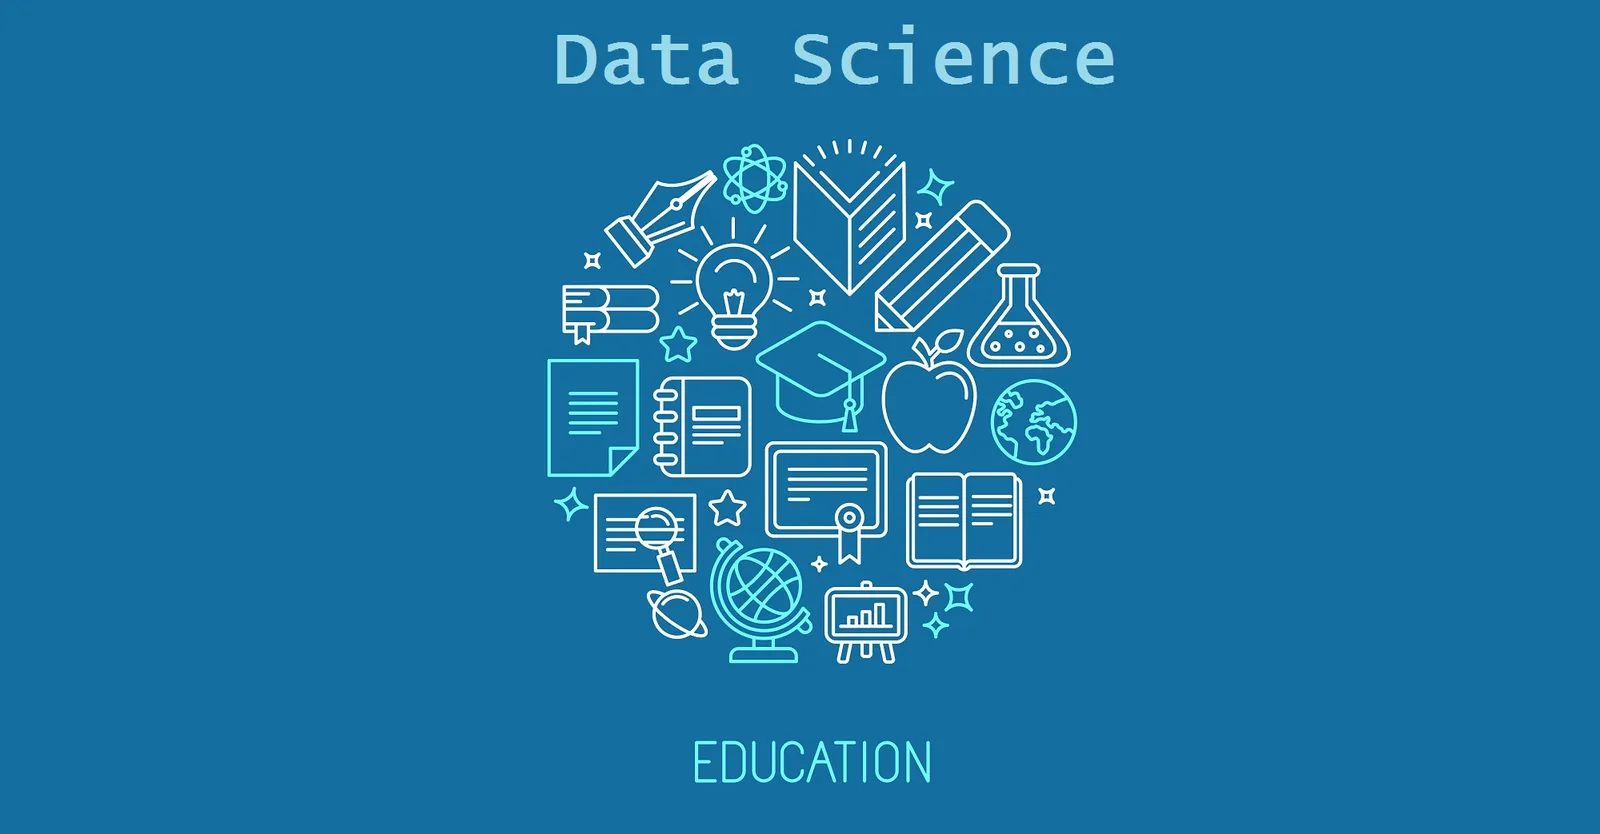 The Future of Data Science